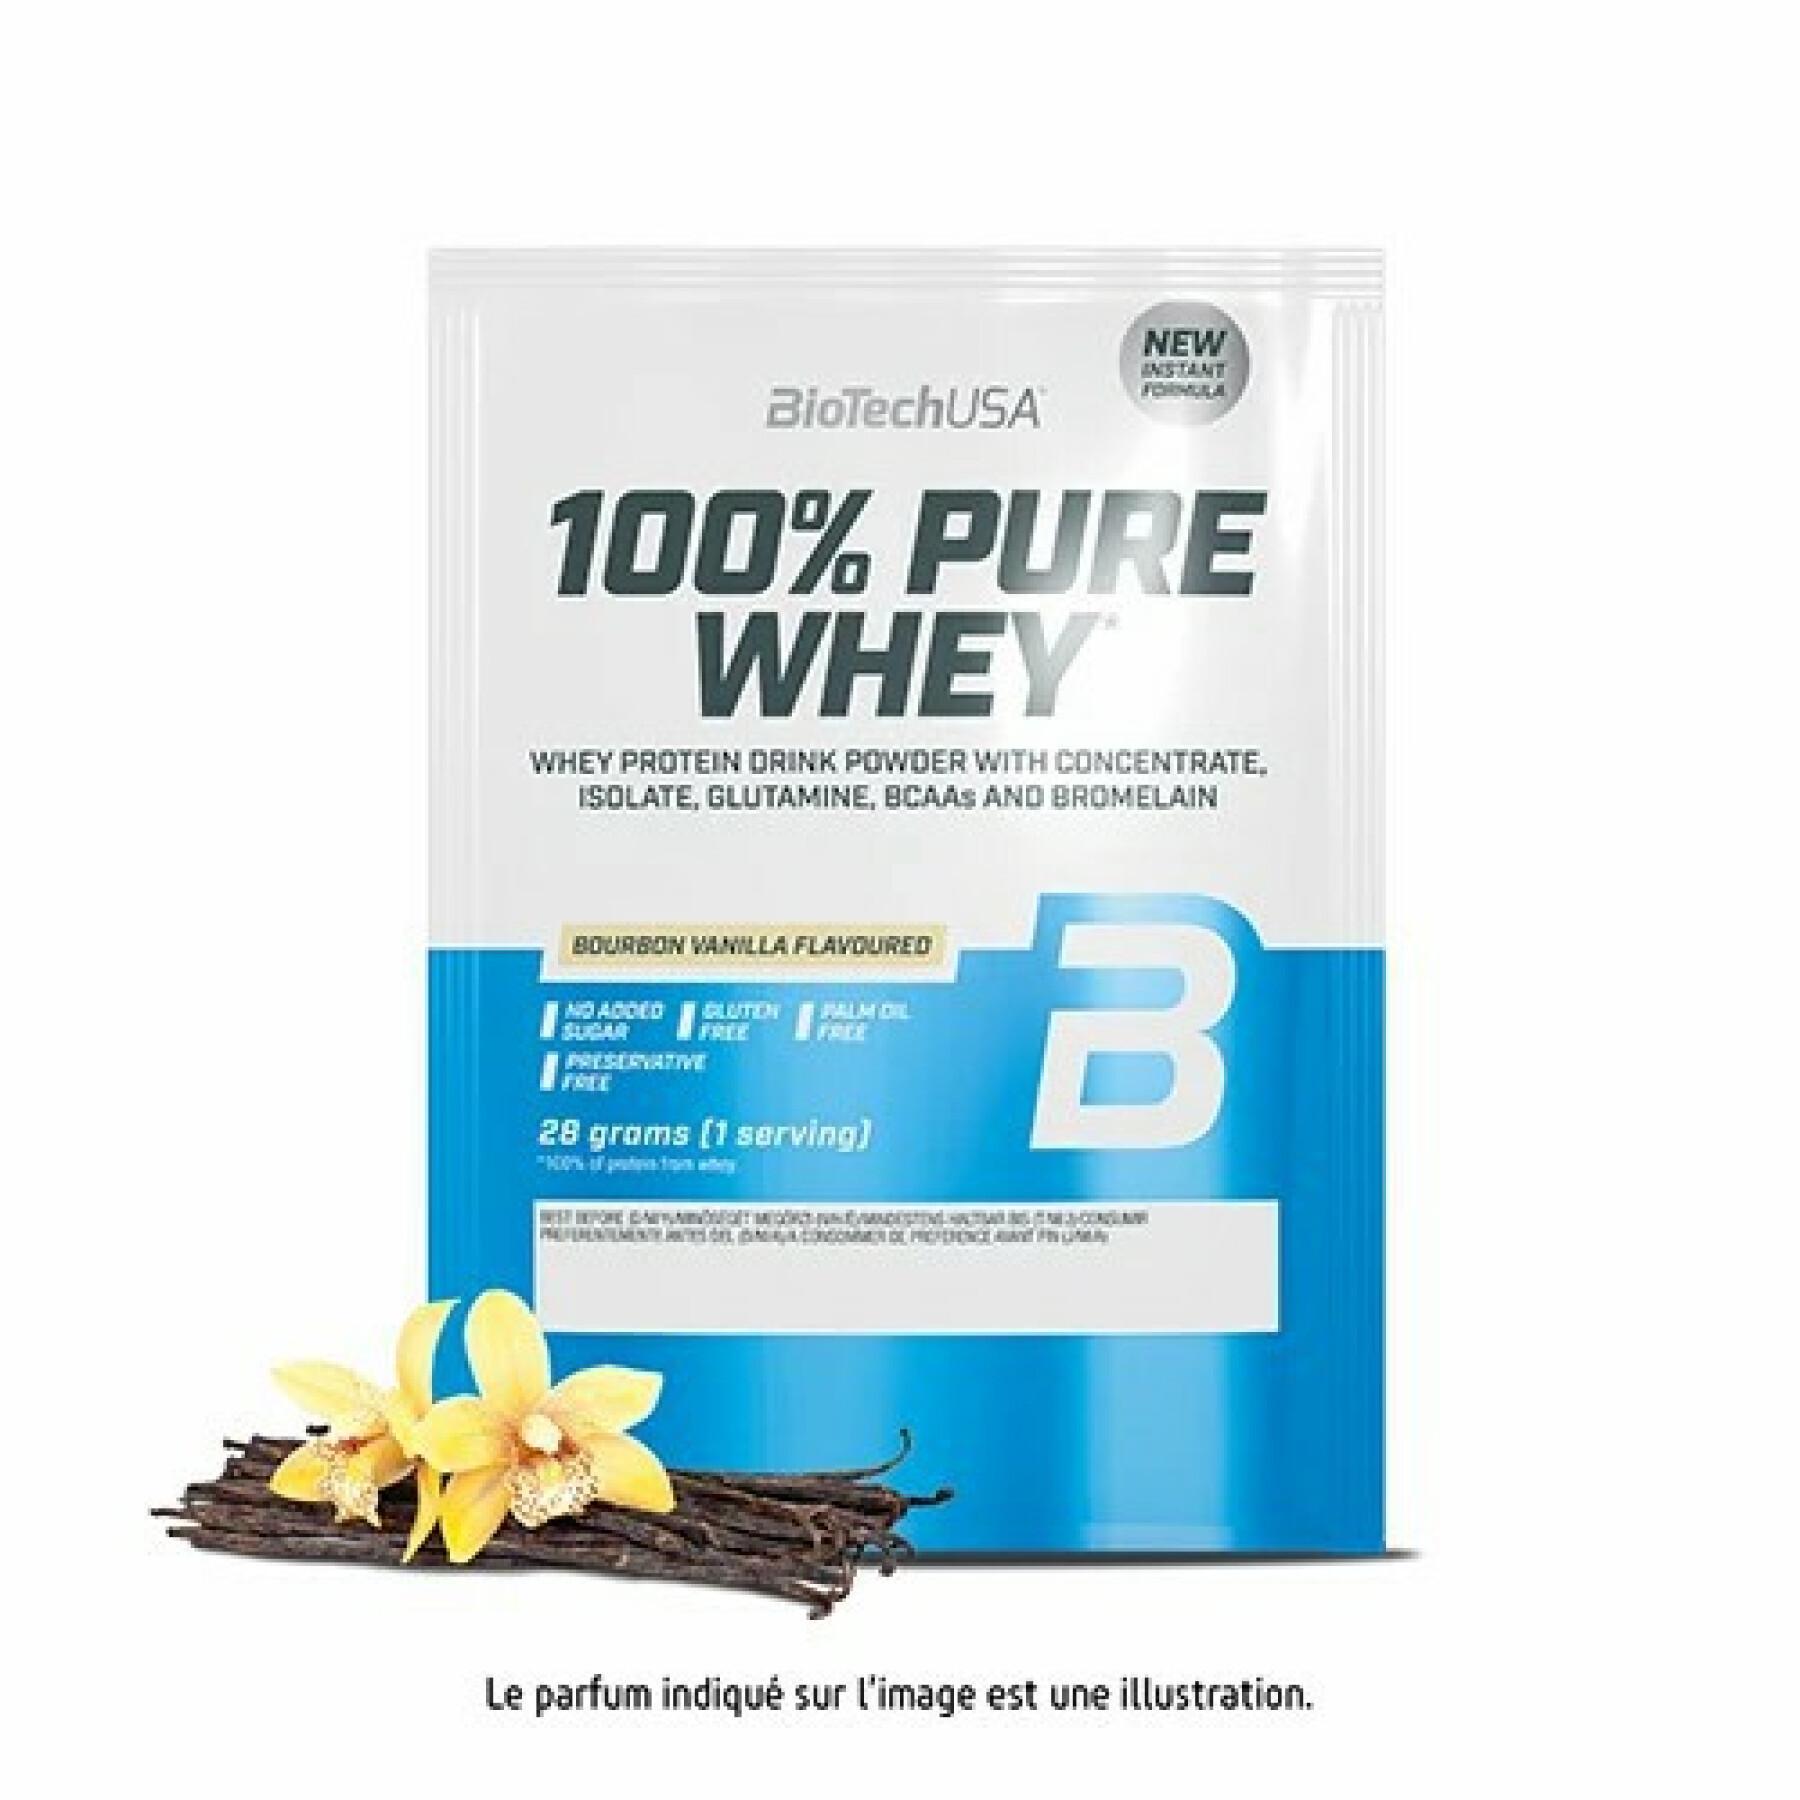 50 packets of 100% pure whey protein Biotech USA - Vanille bourbon - 28g